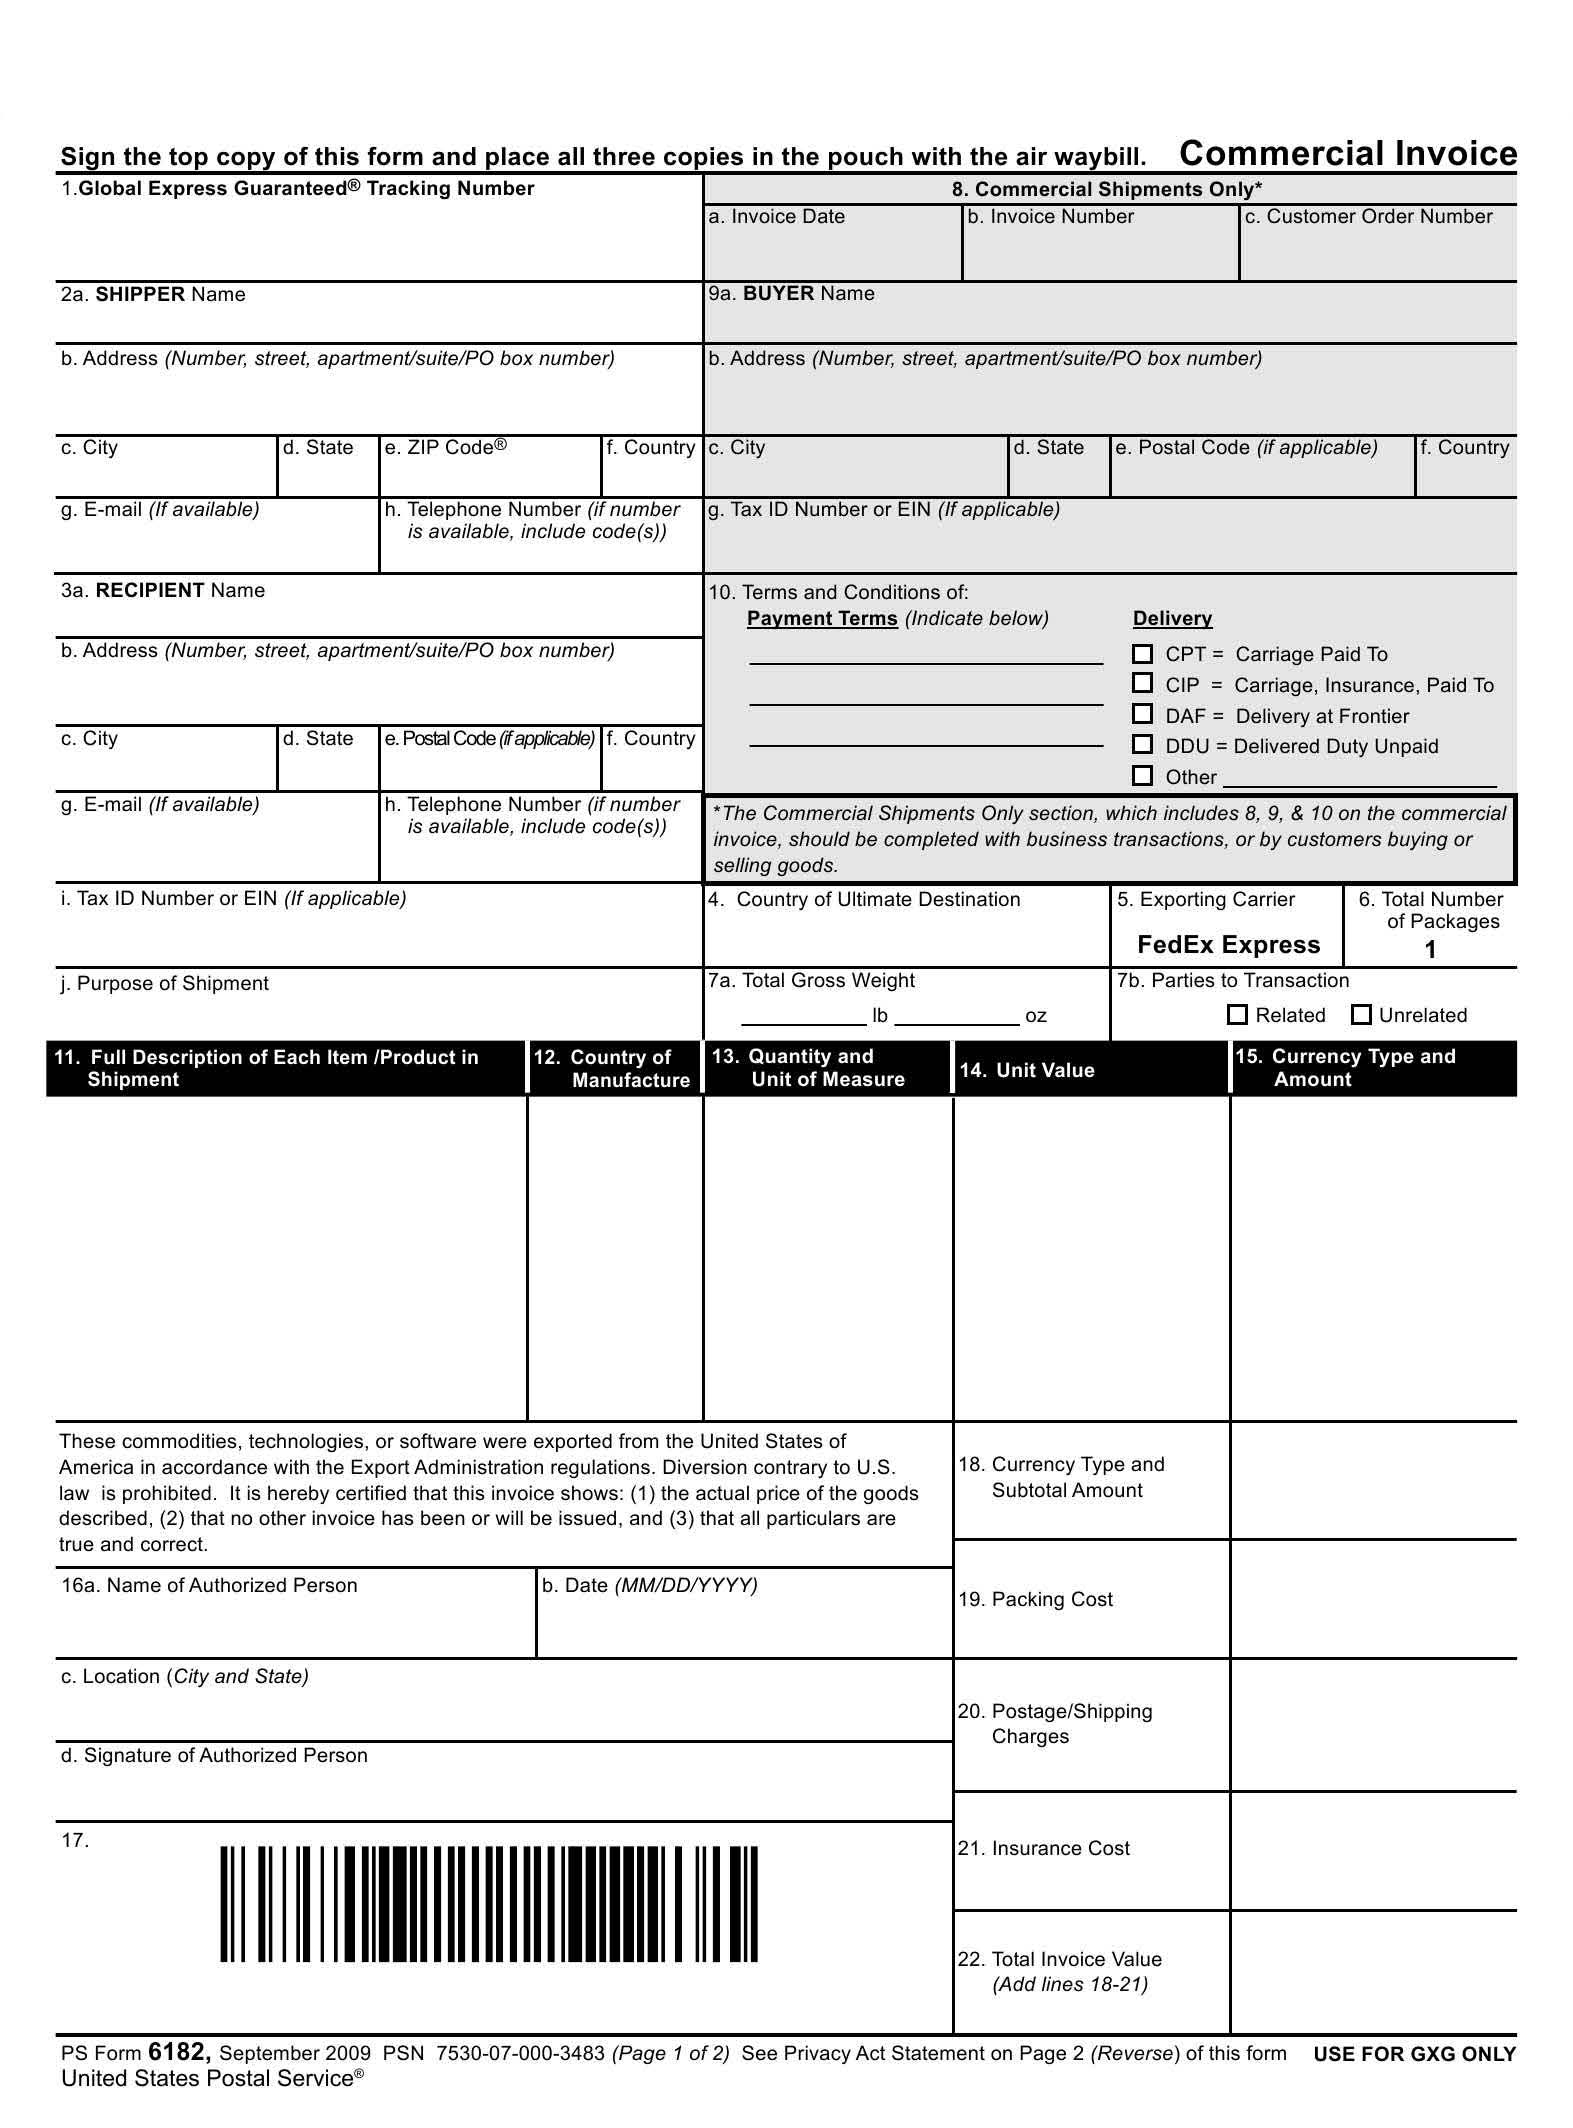 commercial invoice customs invoice form